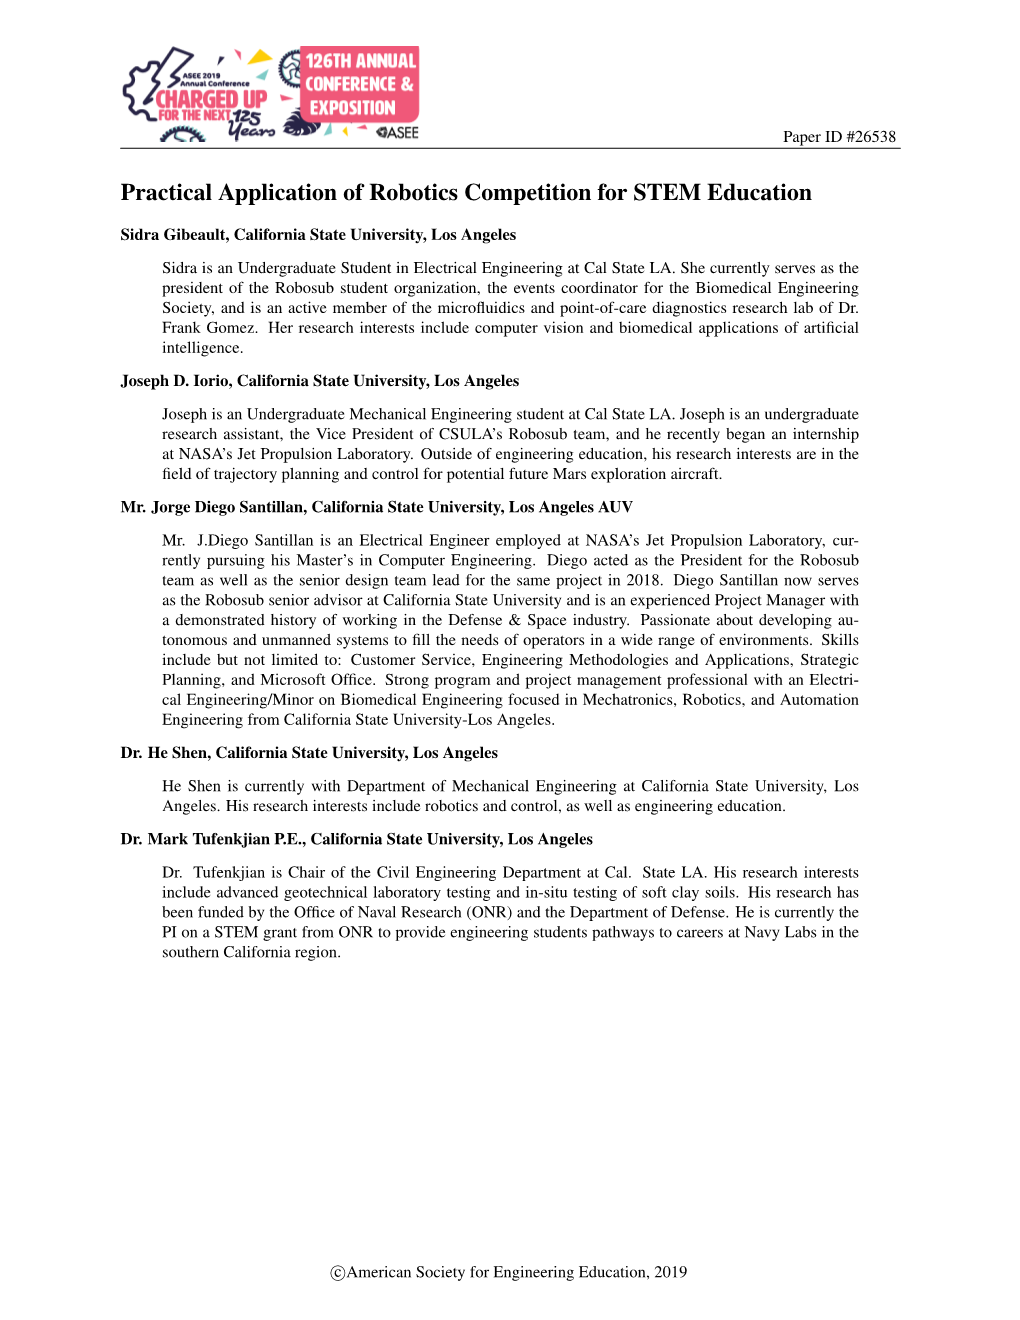 Practical Application of Robotics Competition for STEM Education